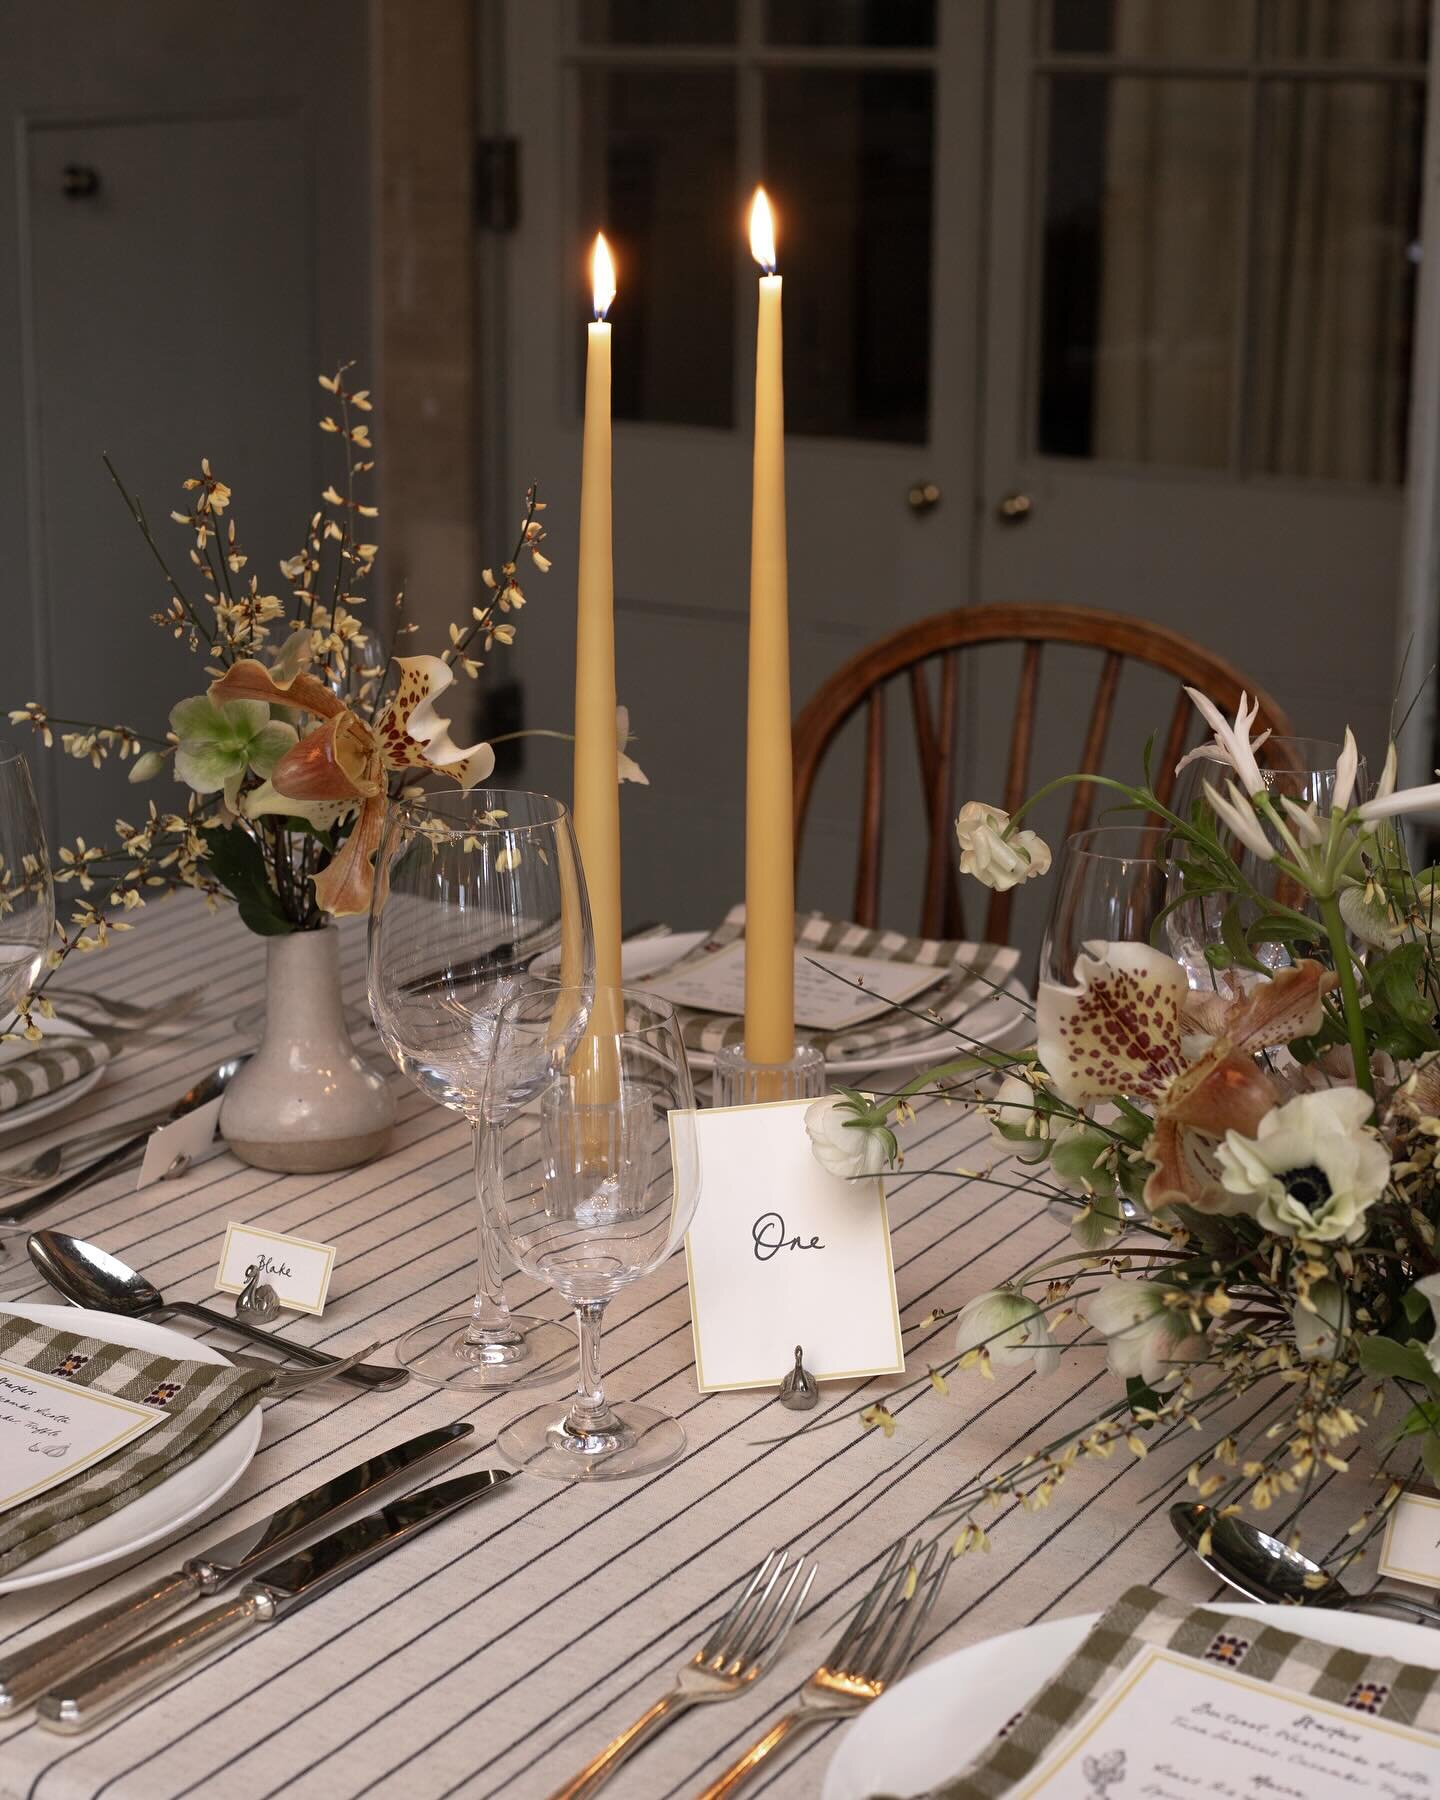 {Spring} The sun is shining &amp; it feels like spring in the air. Happy Easter weekend xx
.
.
.
Flowers ~ @flowersbypassion 
Photo ~ @hana.snow 
Venue ~ Babington House
.
.
#springtablescape #springwedding #springweddingflowers #weddingtablescape #s